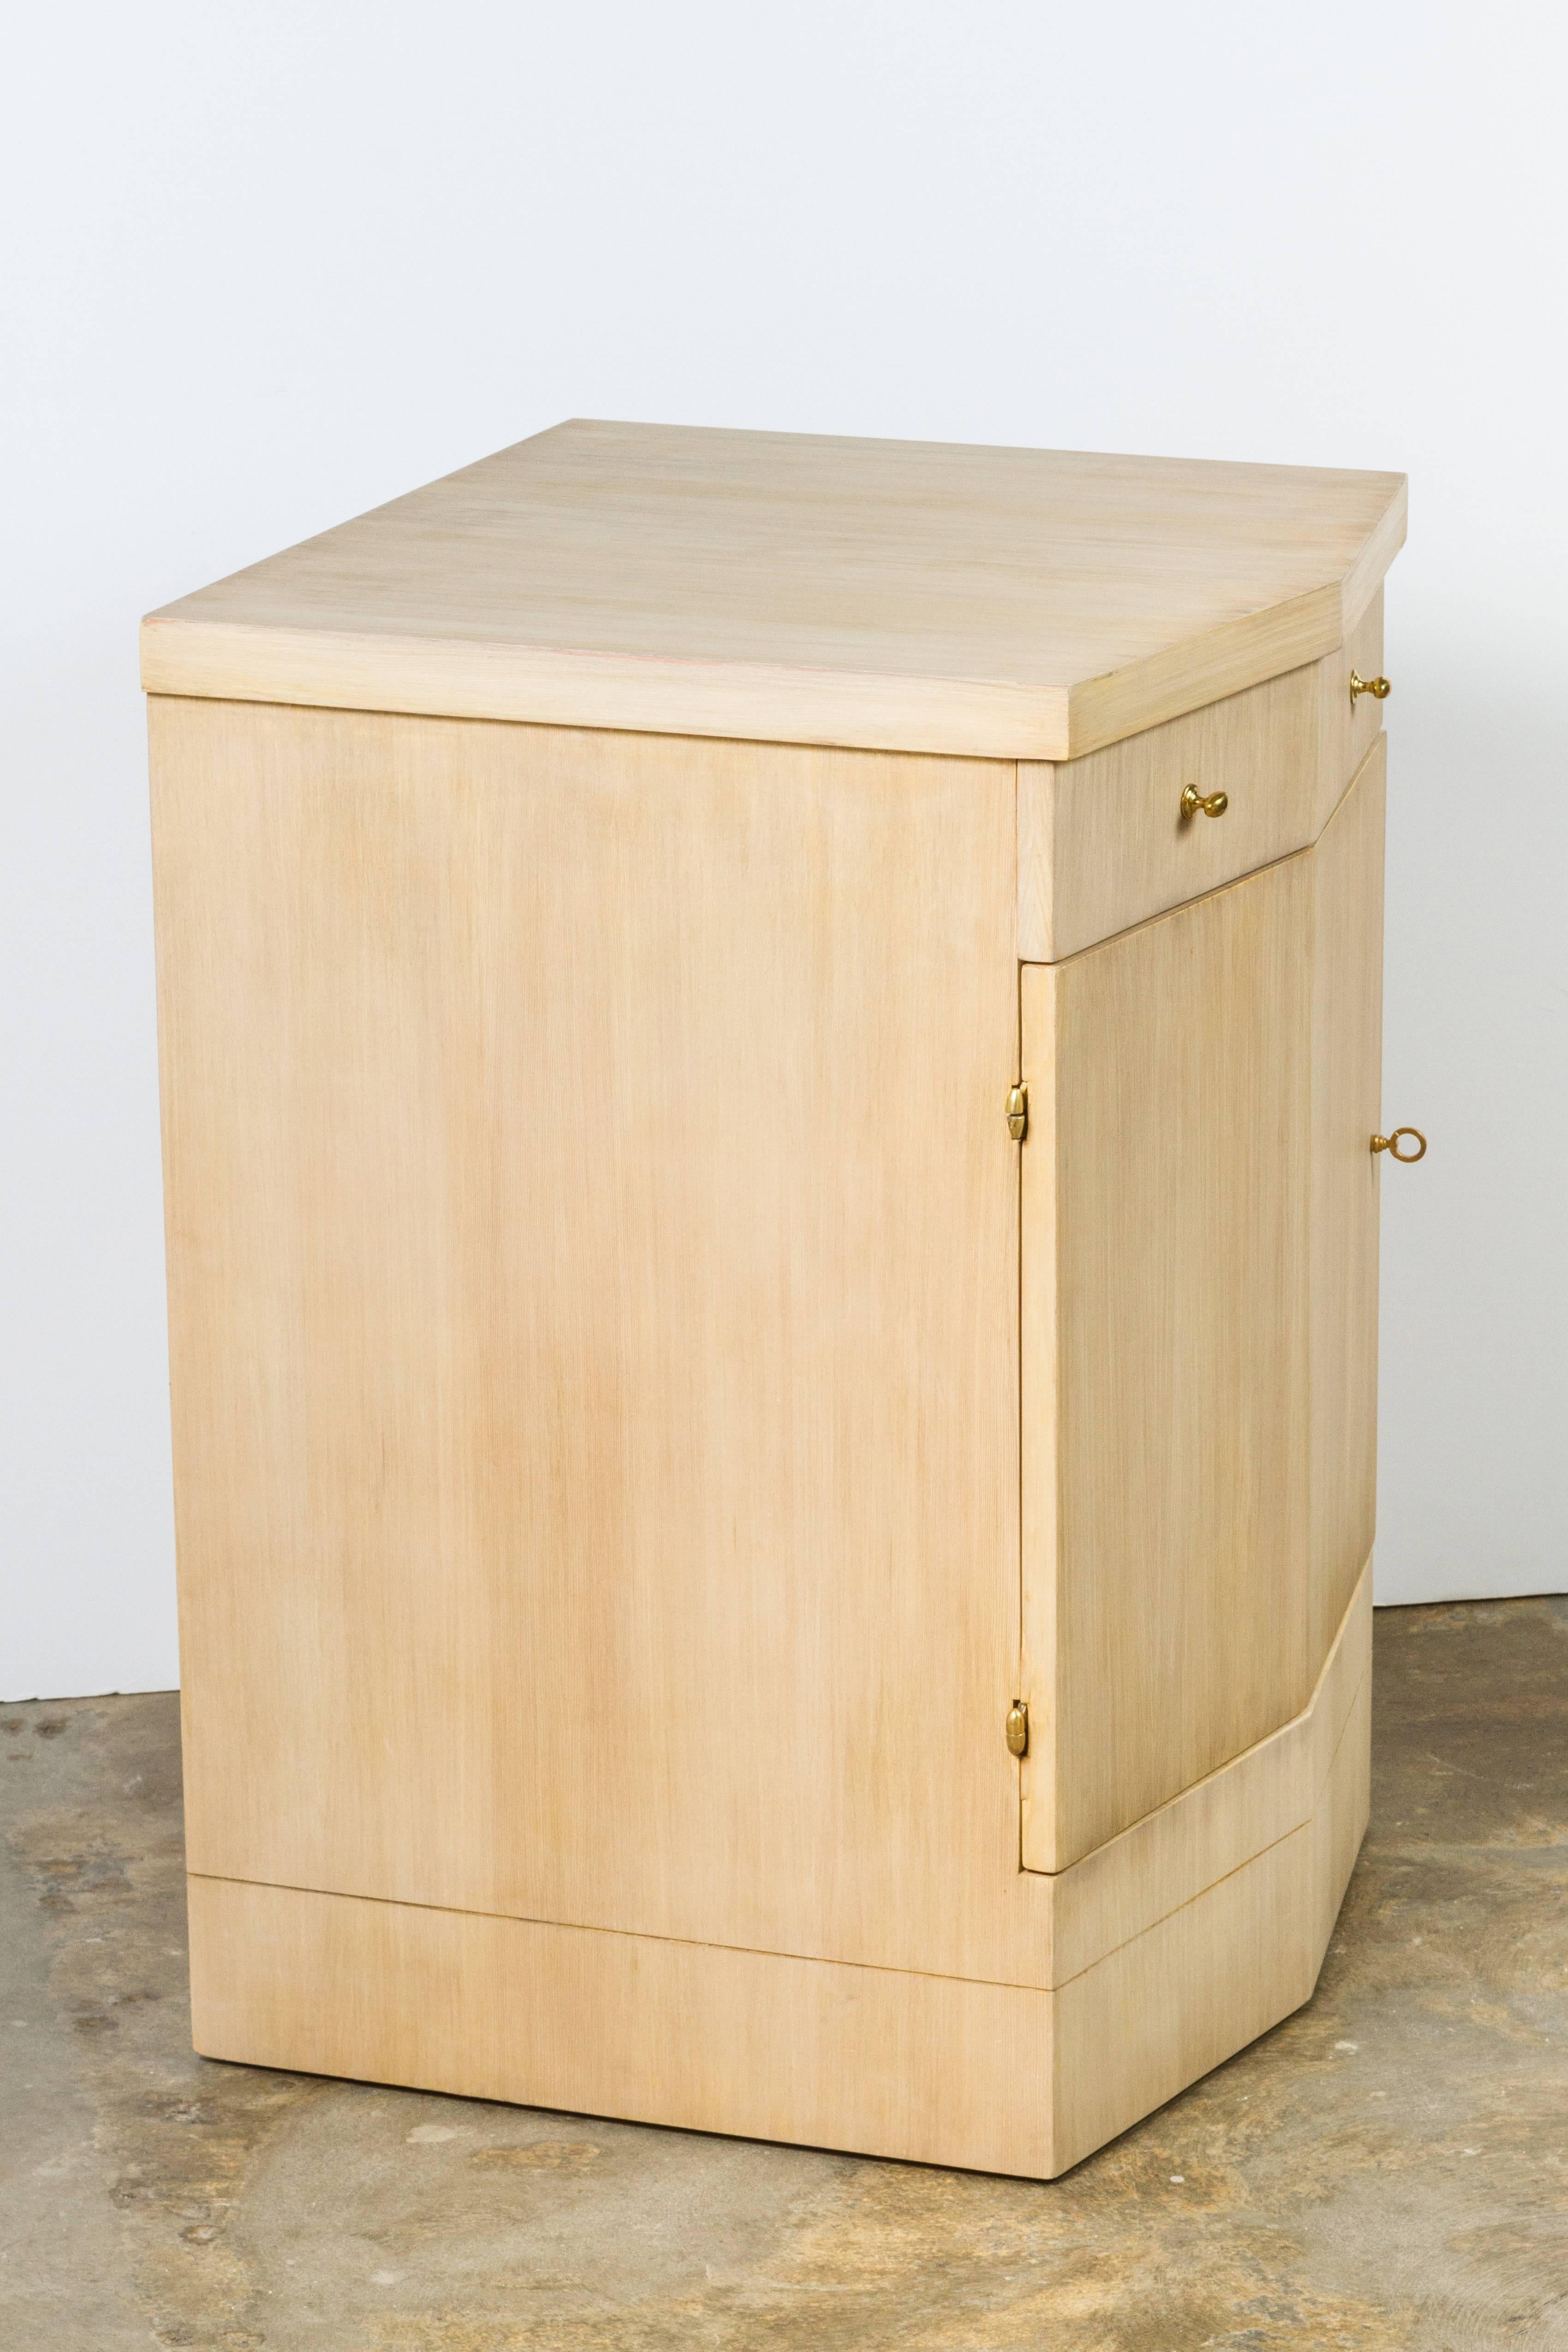 Paul Marra Pinnacle Nightstand shown in bleached Douglas Fir with one drawer and one door. Removable shelf. By order. Price  is per each. (For orders, specify left/right side door opening).